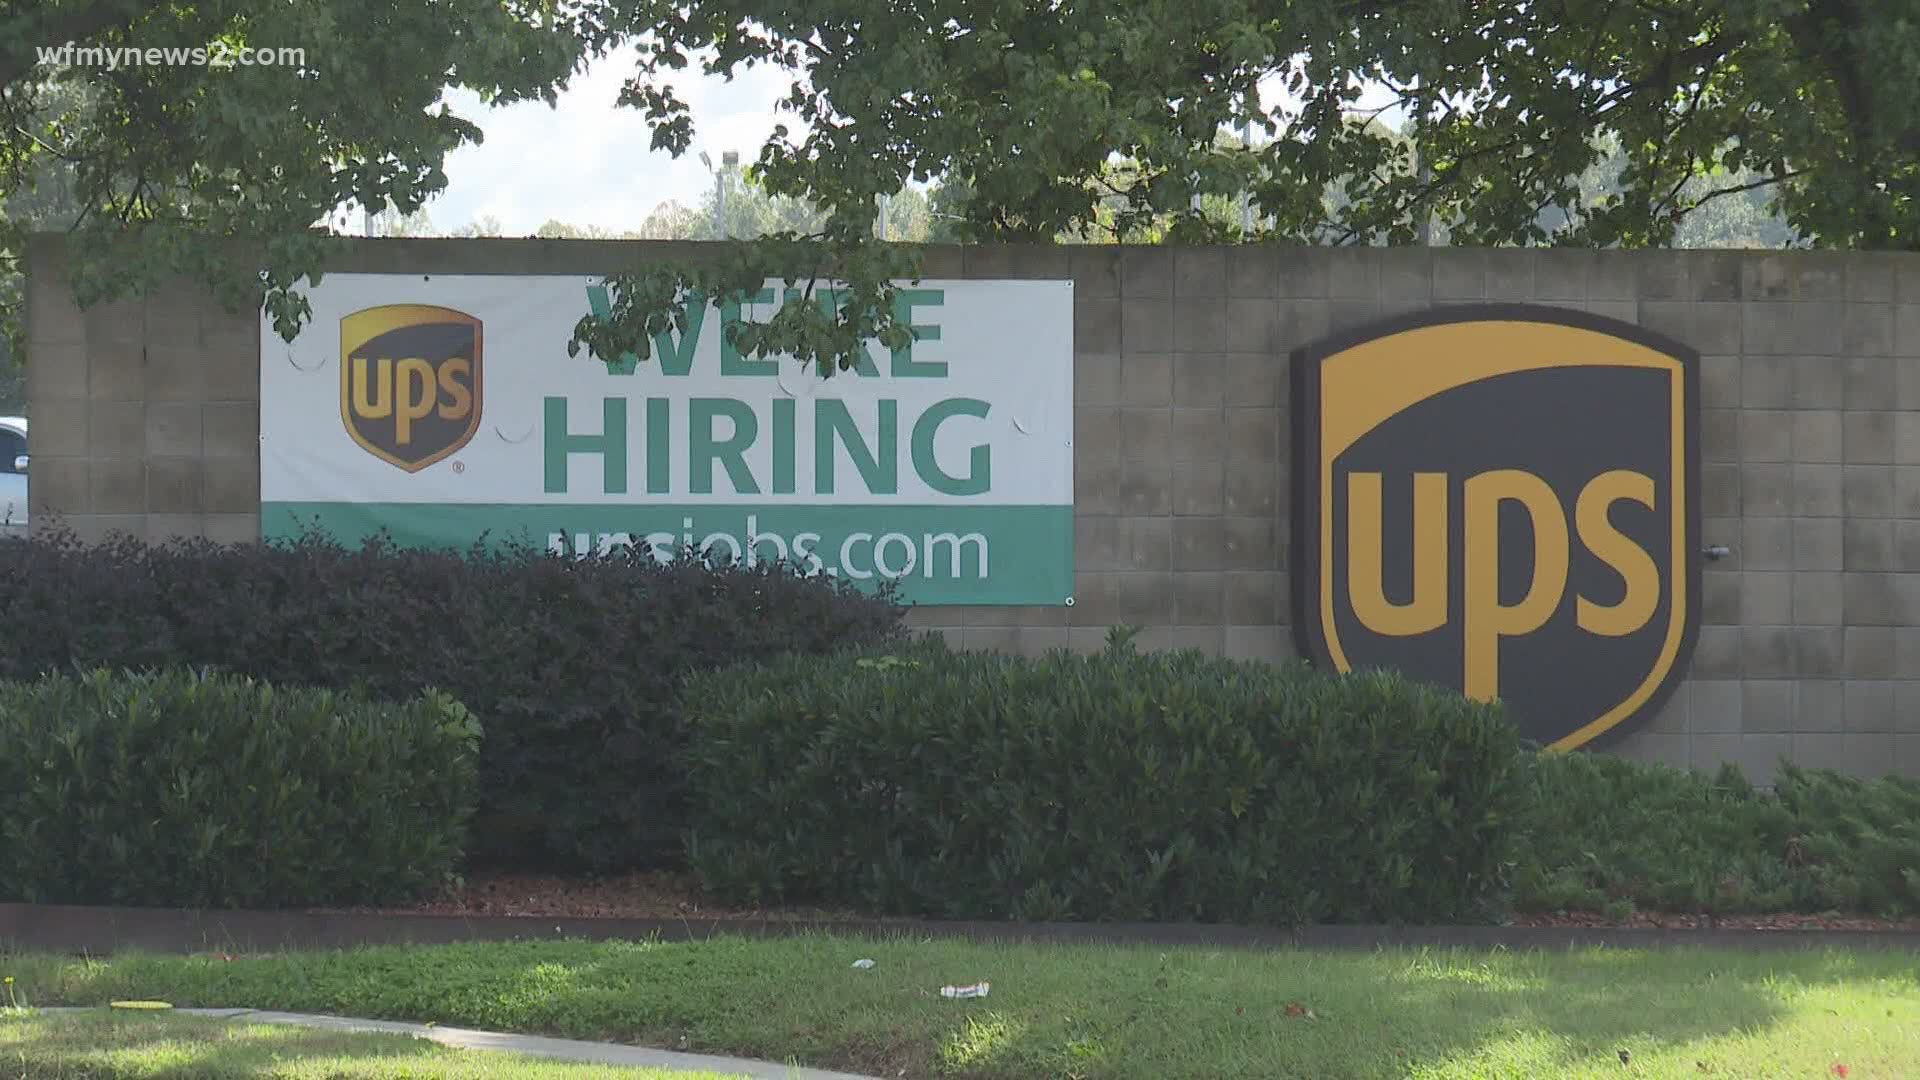 UPS is investing $316 million to expand and build in the Triad.